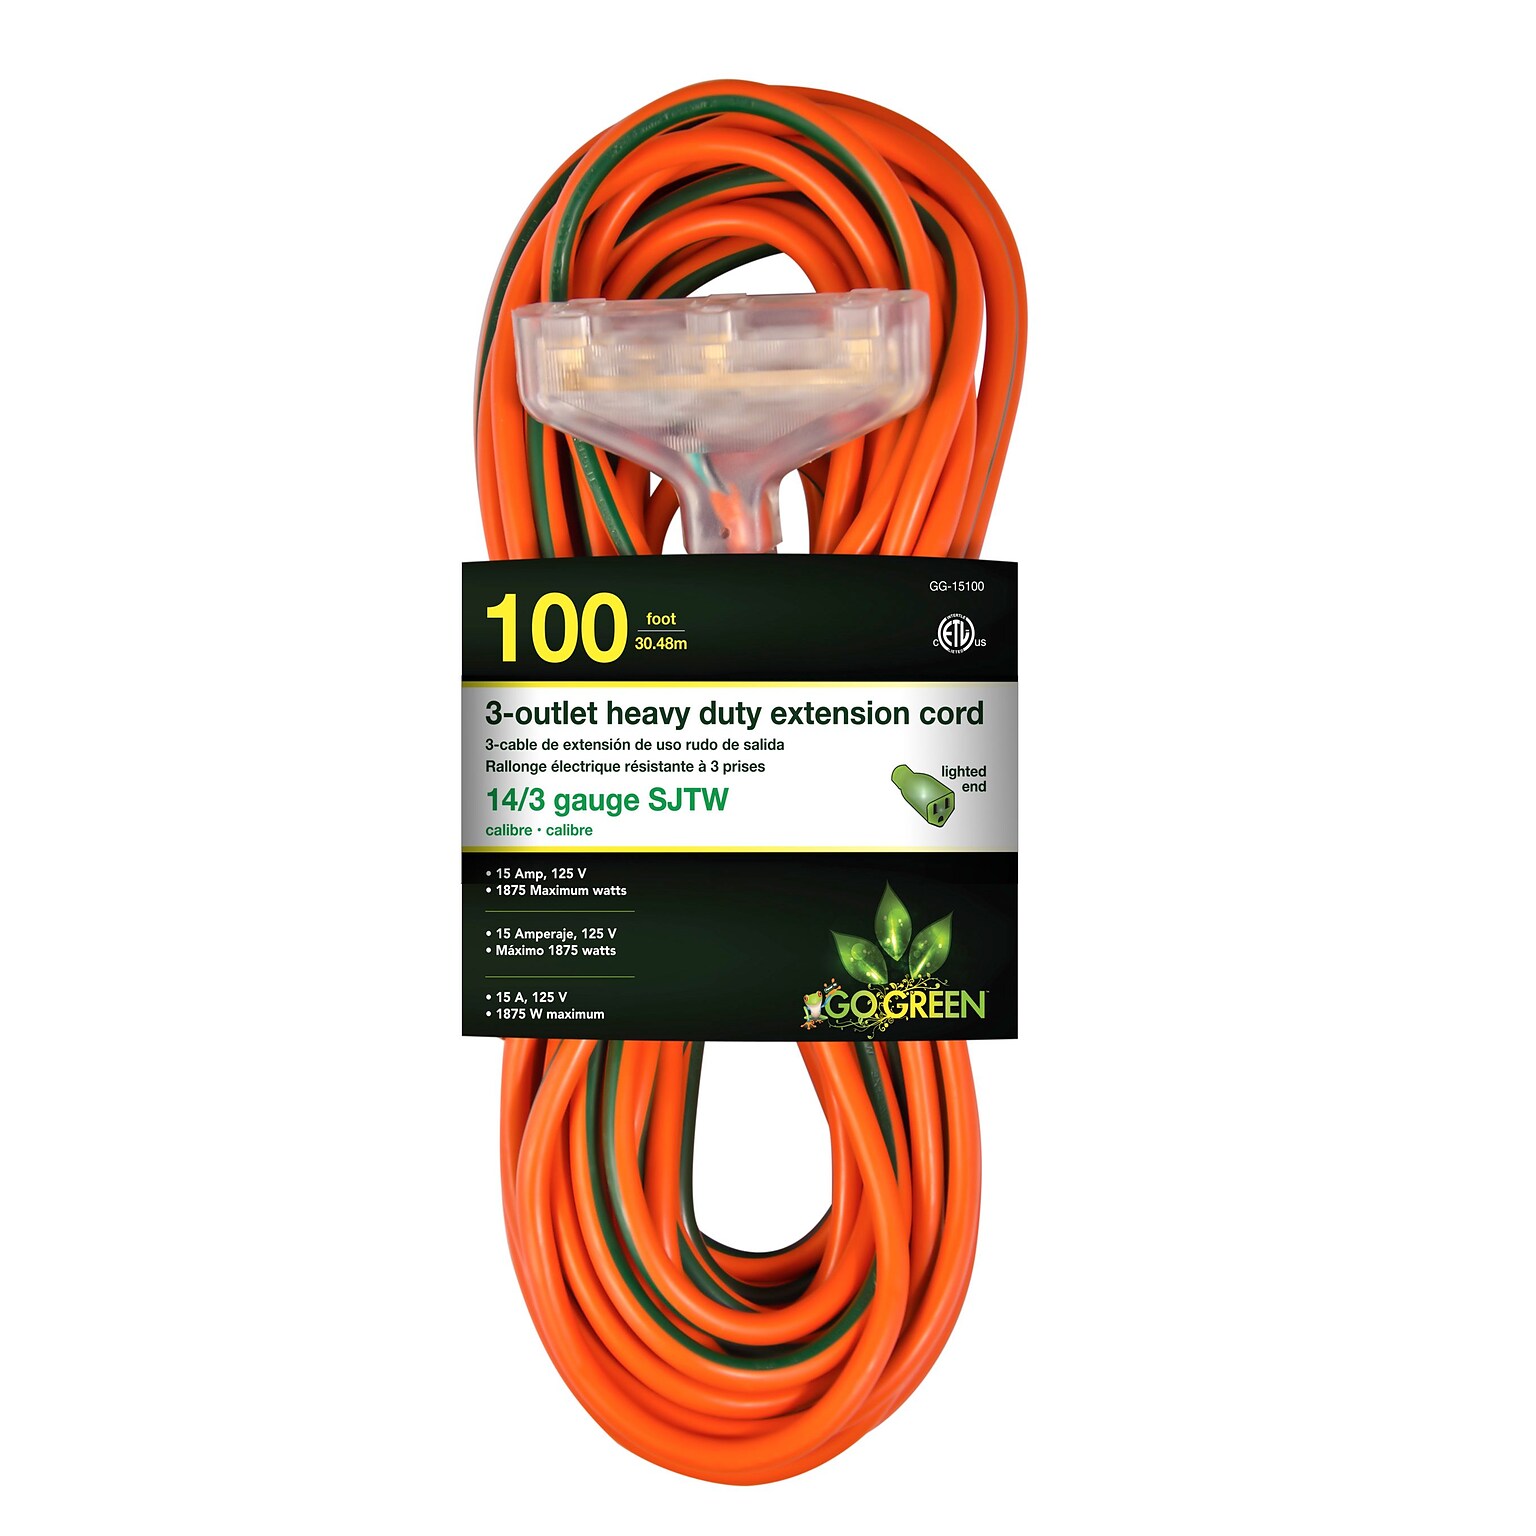 GoGreen Power 100 Indoor/Outdoor Extension Cord, 3-Outlet, 14 AWG, Orange (GG-15100)